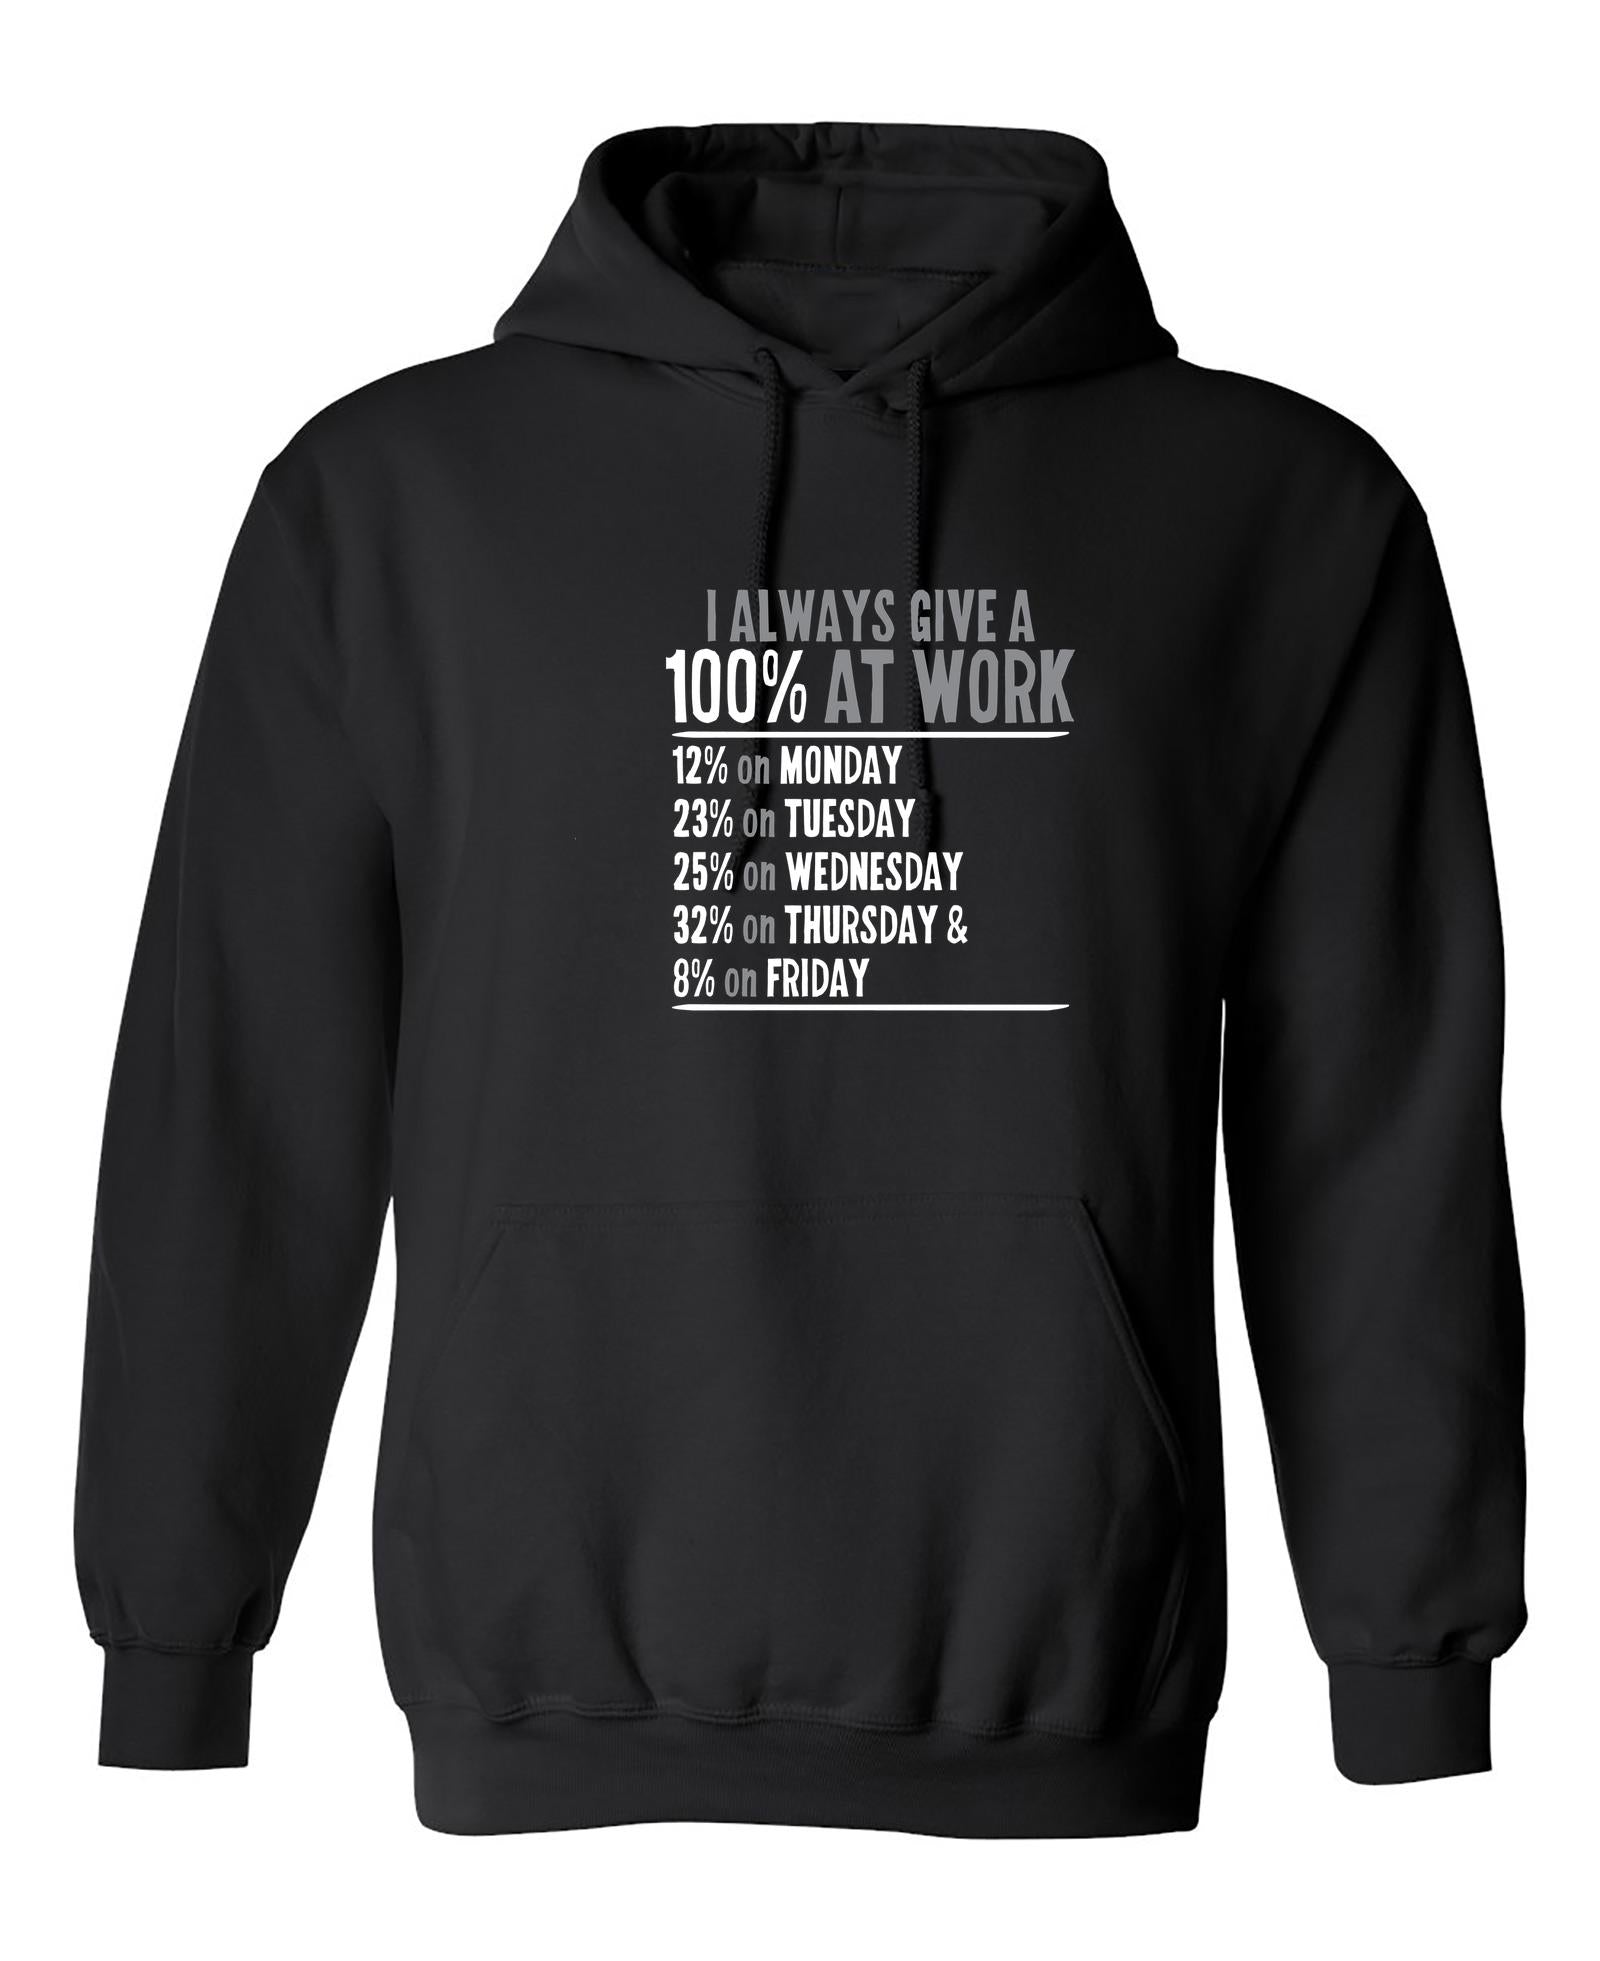 Funny T-Shirts design "I Always Give 100% At Work"